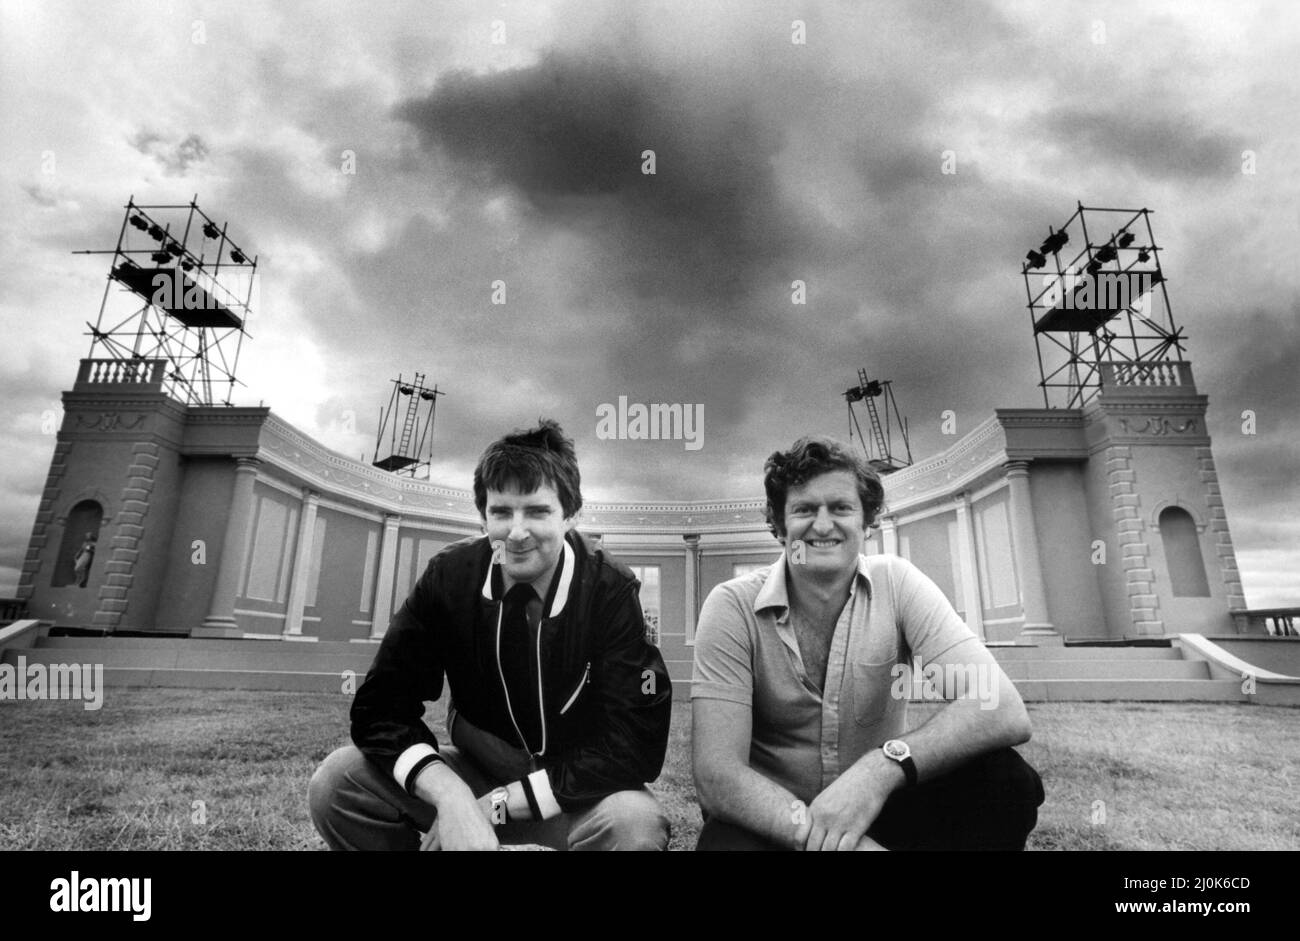 Television Programme BBC series It's a Knockout   The stage is set for the British heat of Jeux Sans Frontieres which is being held at Princess Anne Park in Washington, Tyne and Wear 22 August 1981 - Stuart Furber, design and games director is pictured right with Geoff Wilson, producer, left. Stock Photo